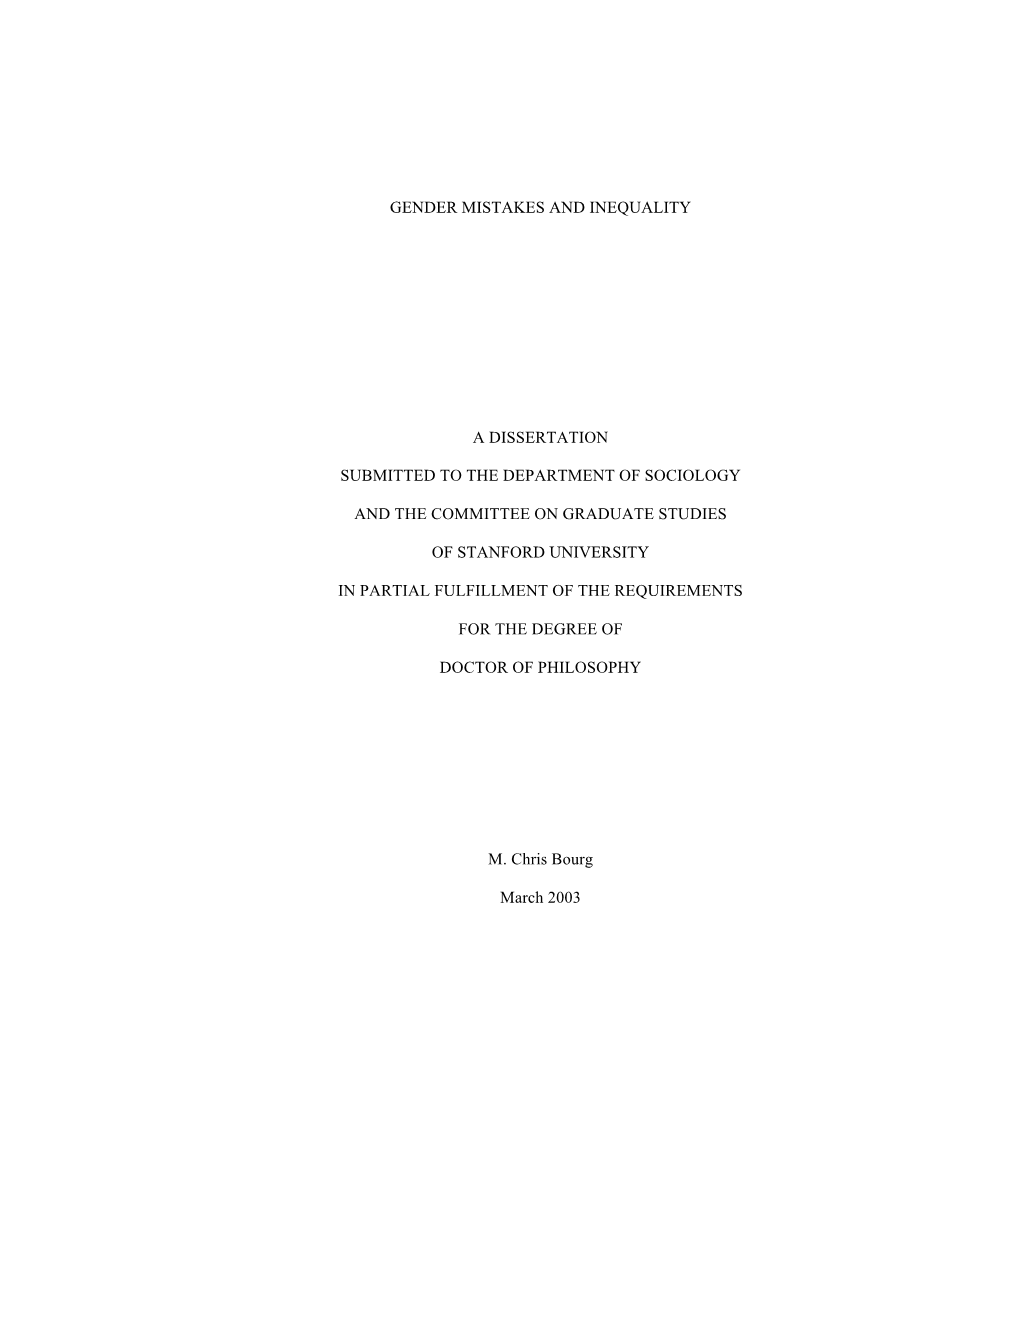 Gender Mistakes and Inequality a Dissertation